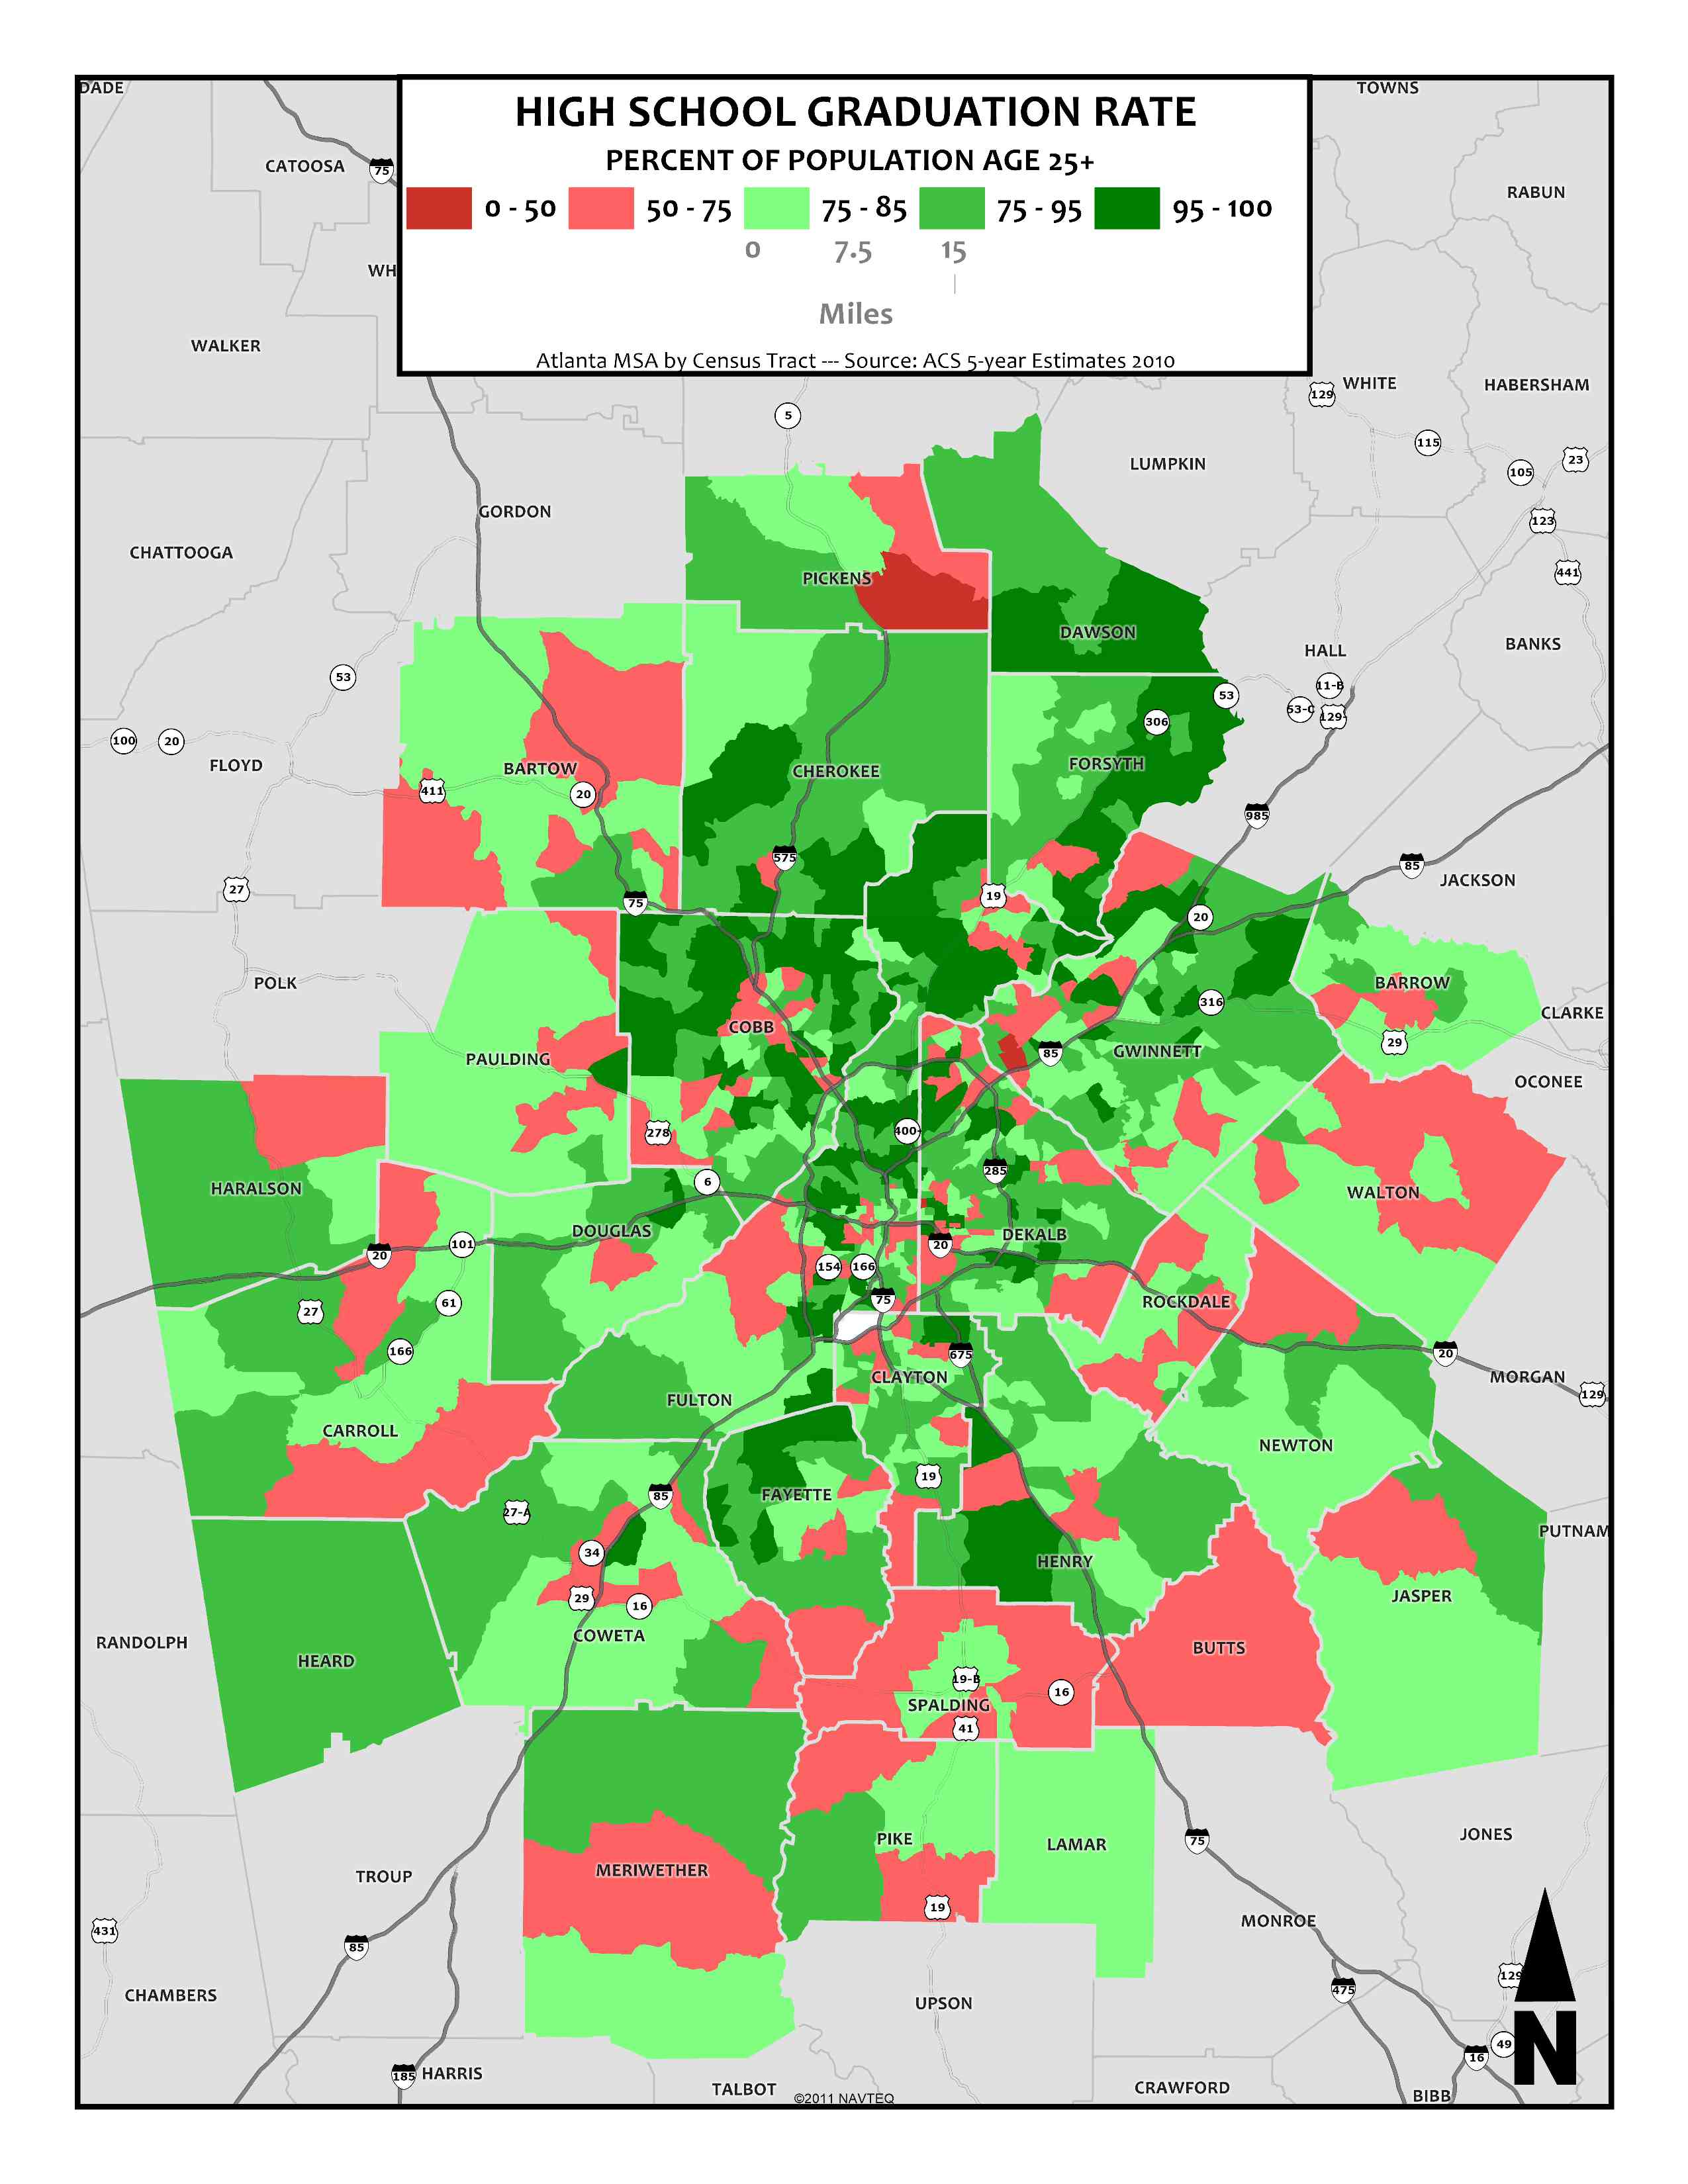 High School Graduation Rate, 2010 – 28-County Census Tracts